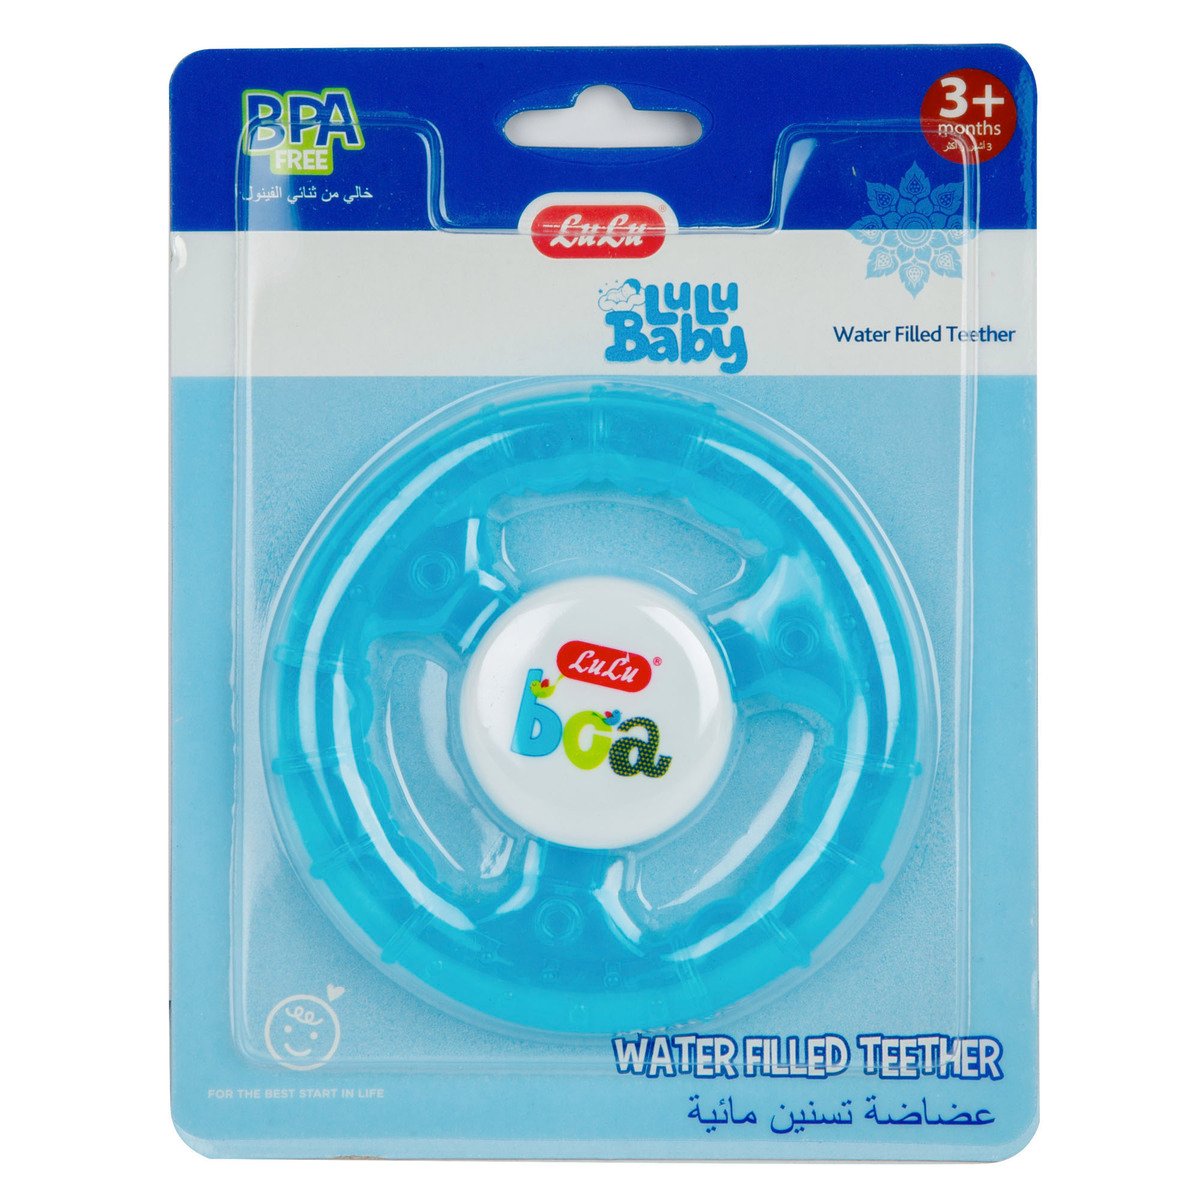 LuLu Water Filled Teether For 3+ Months LL730 1 pc